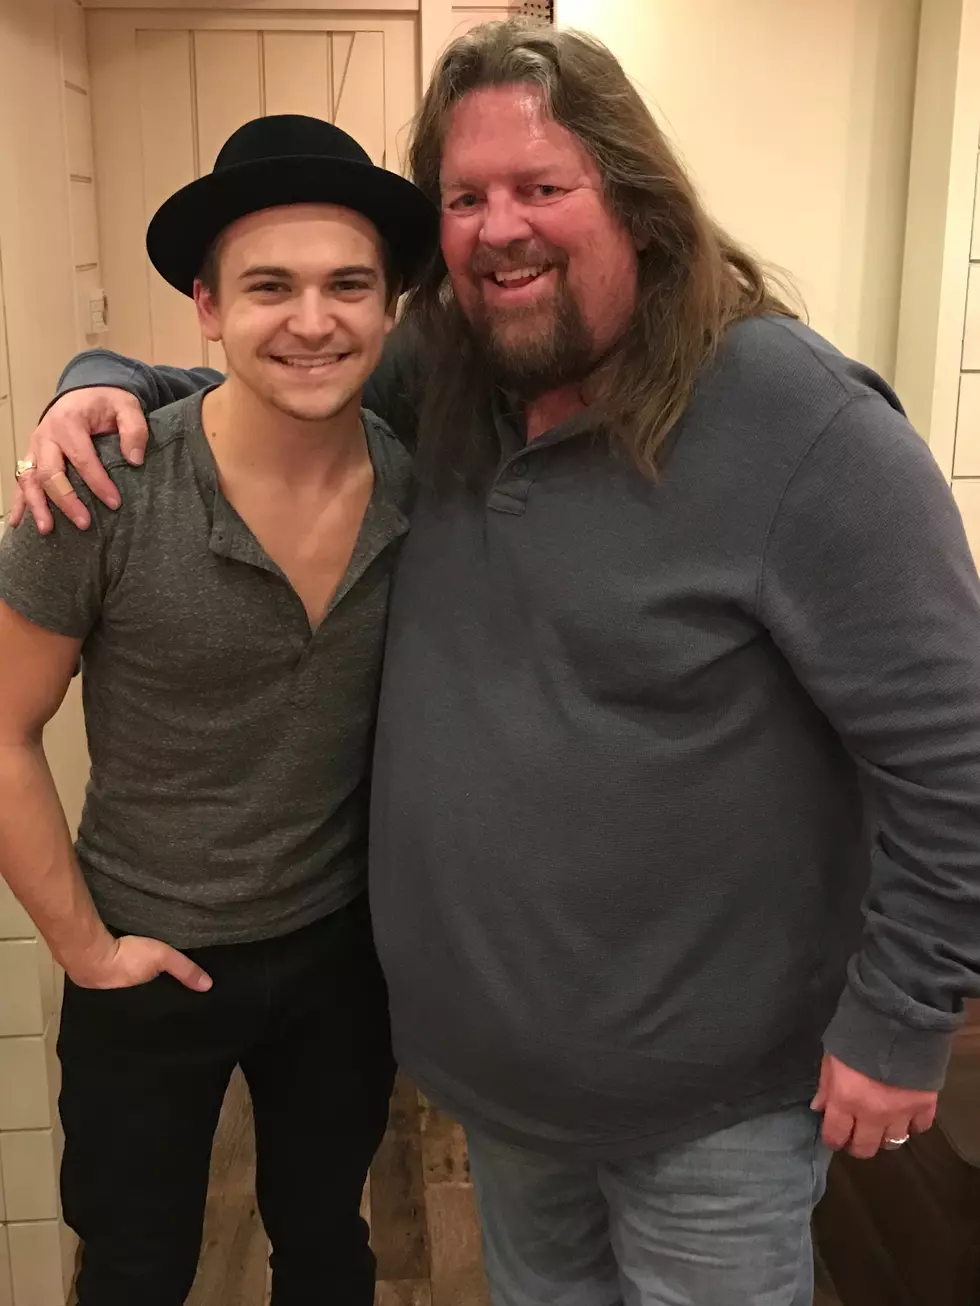 My Evening Hanging Out With Hunter Hayes Was a Treat For My Ears and Soul [VIDEO]